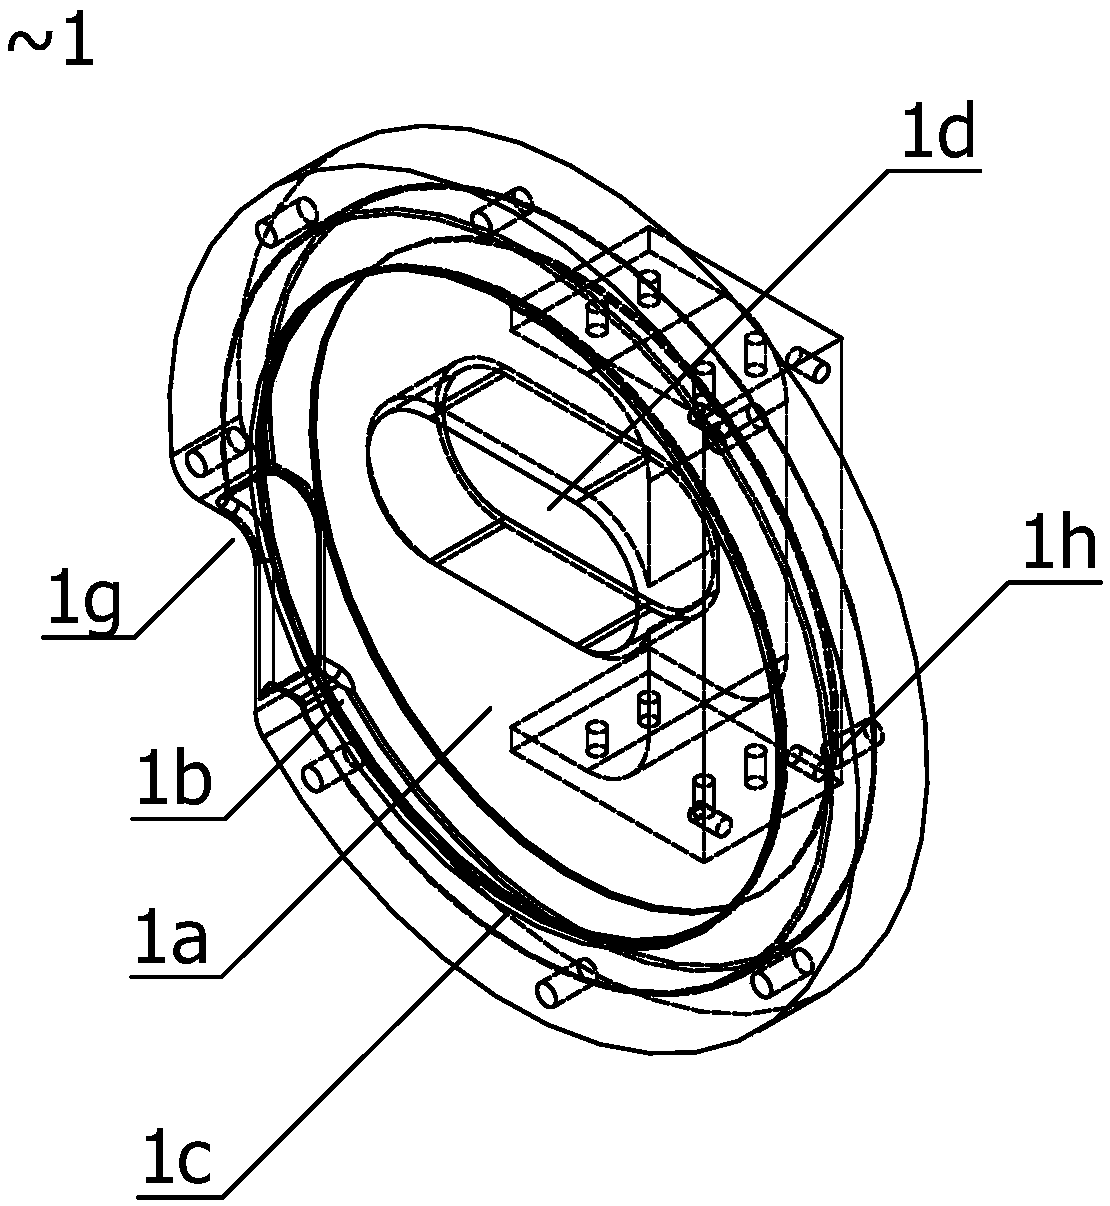 A self-adjusting cable tensioning device